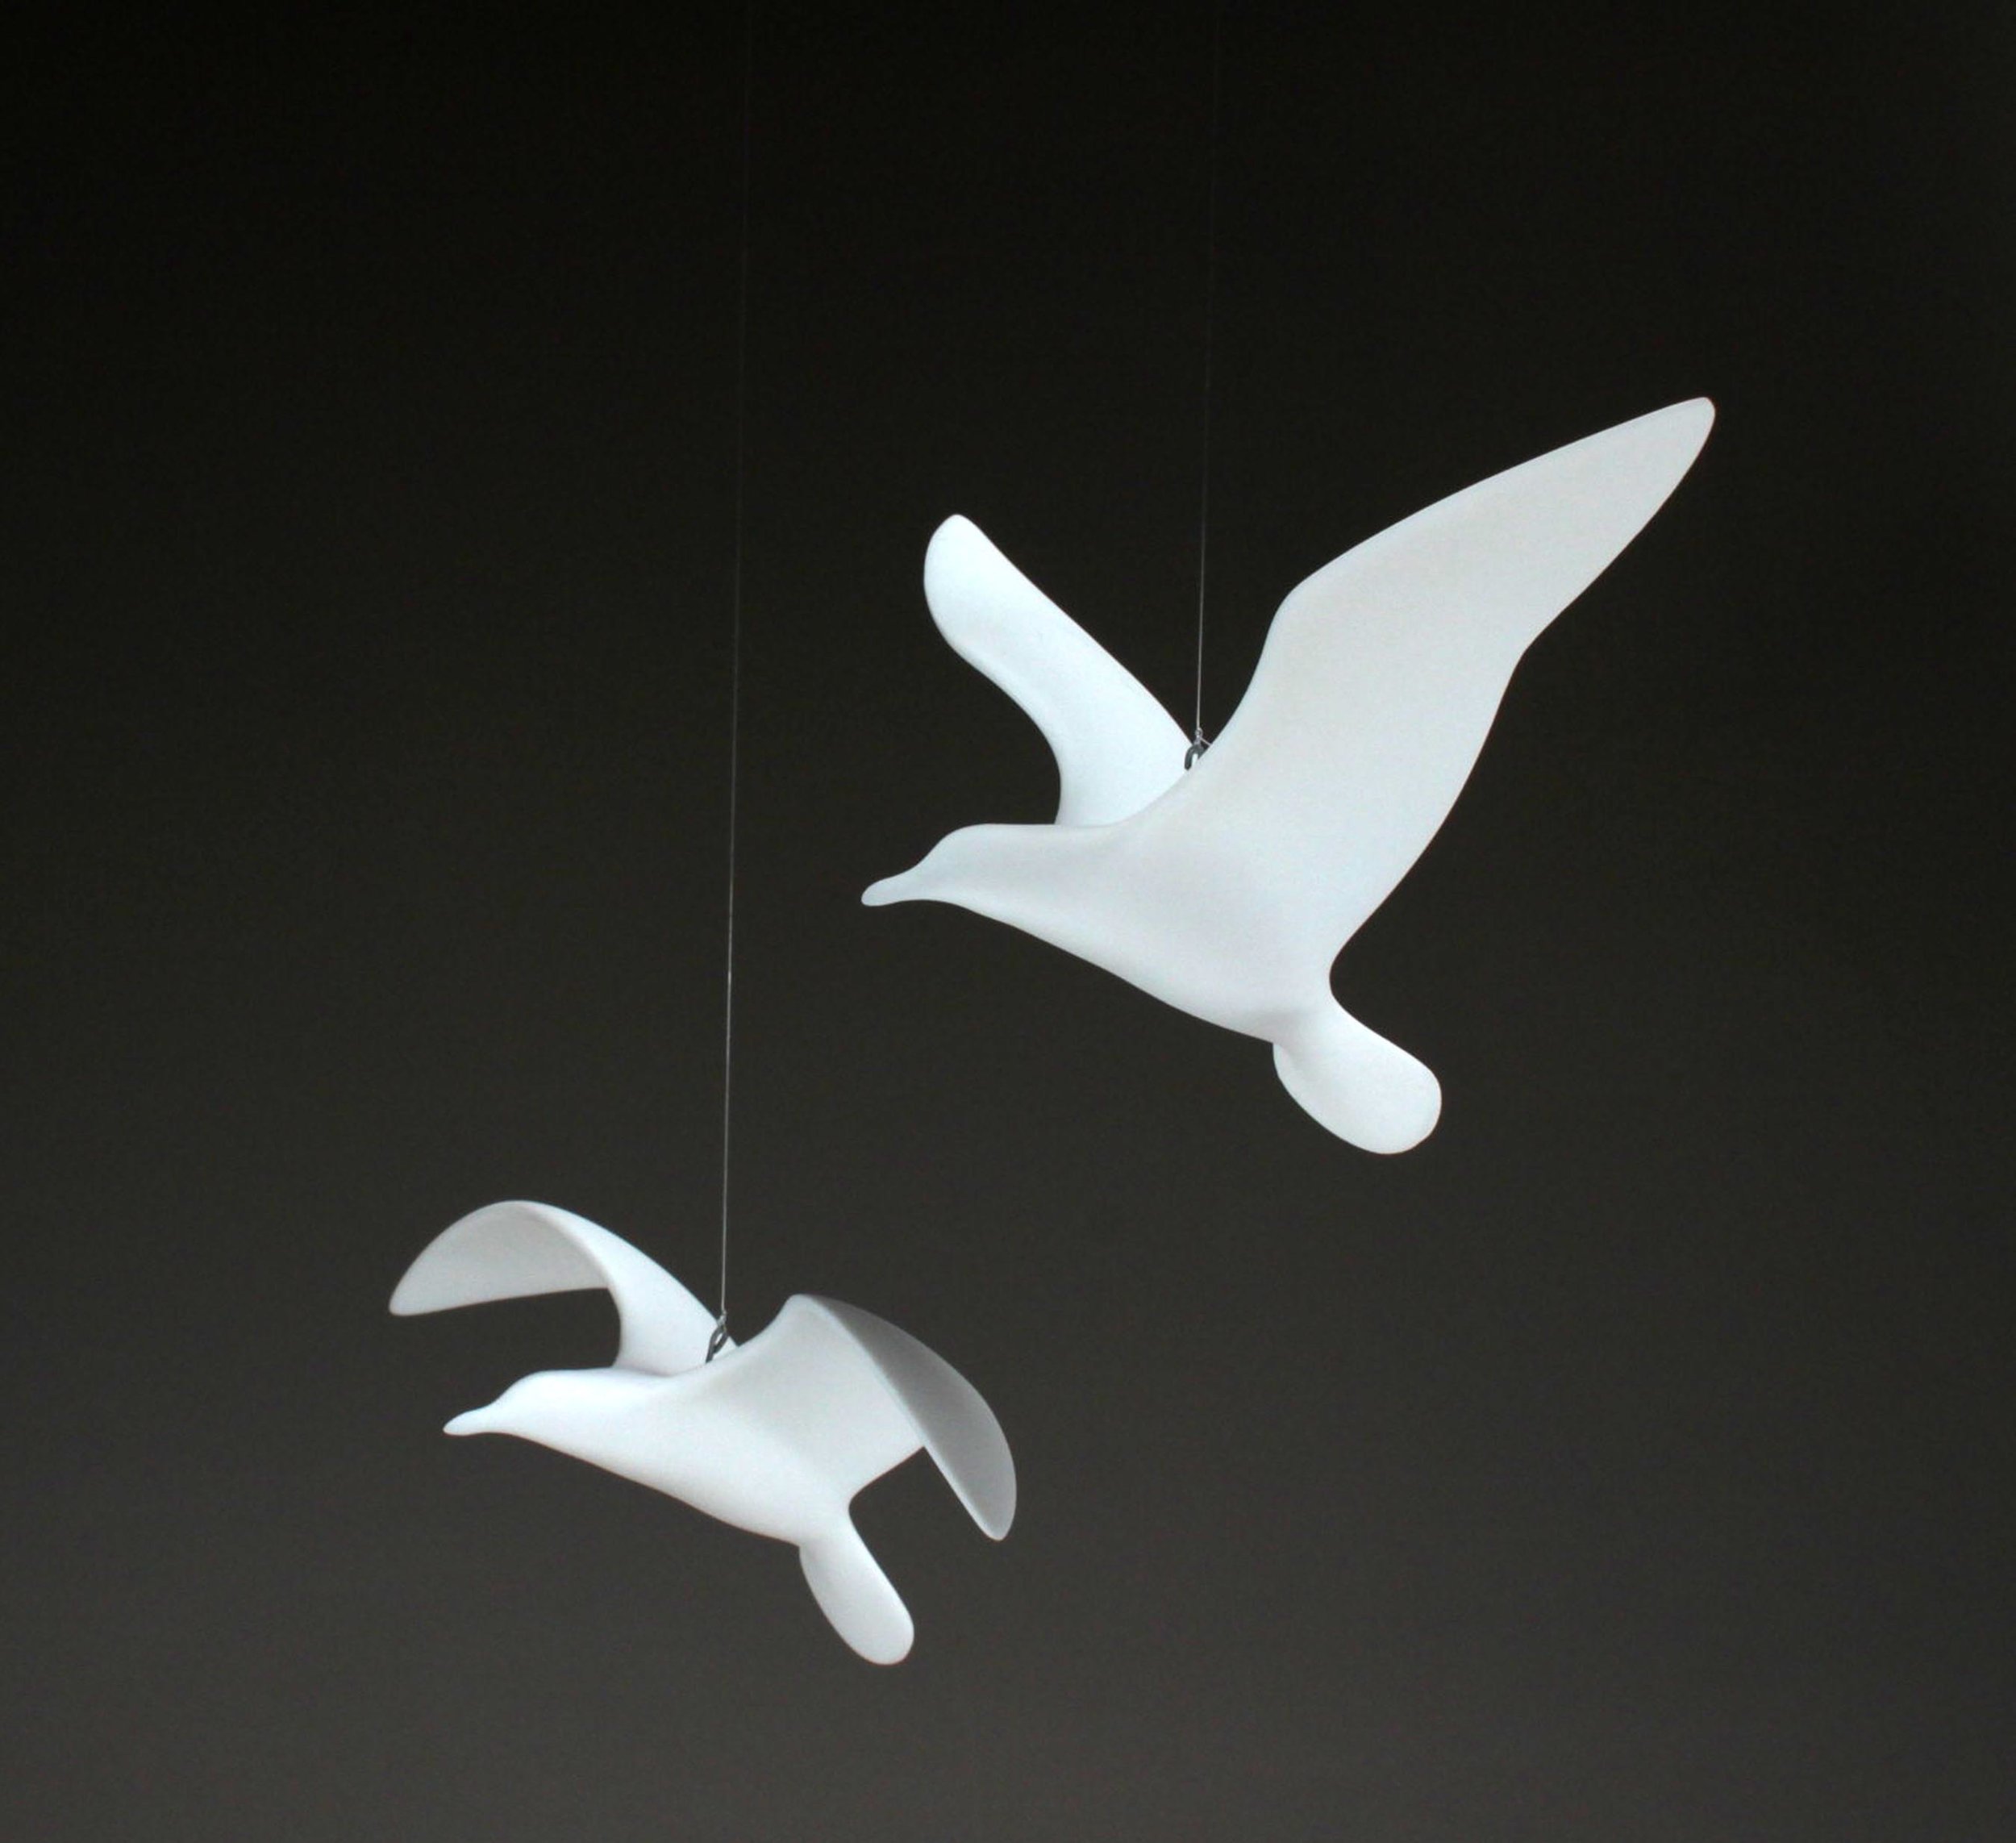  Sales of the original seagulls are still brisk after more than 44 years. Because of this, we feel justified in claiming that it has become a classic. Their popularity has been spurred by the recent addition of the Medium Gulls 0125 to the suspended 